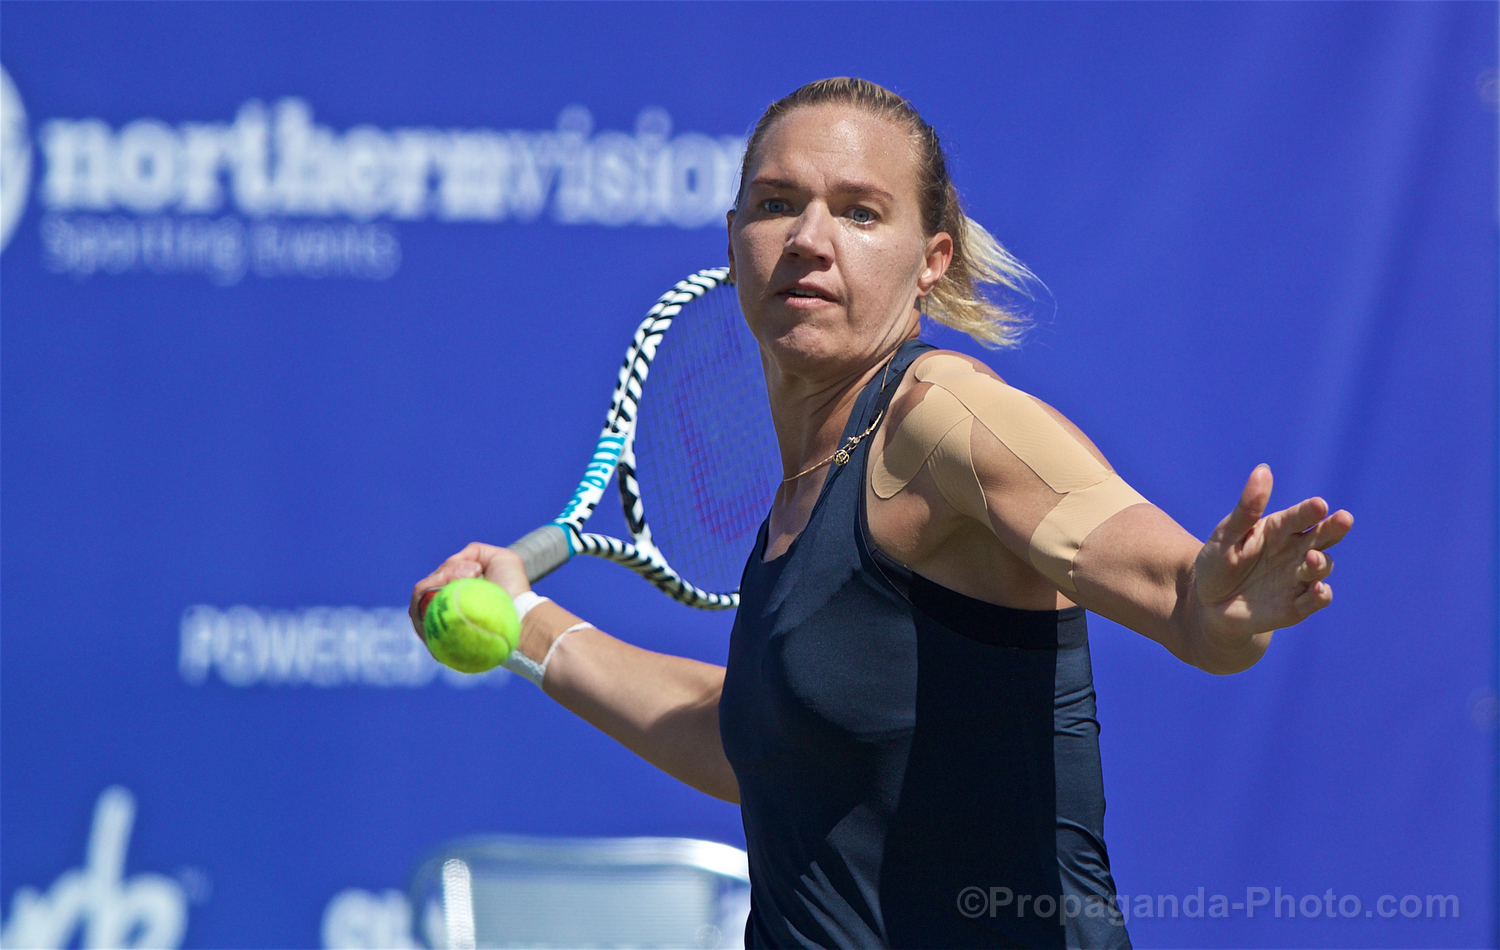 LIVERPOOL, ENGLAND - Thursday, June 20, 2019: Kaia Kanepi (EST) during the Liverpool International Tennis Tournament 2019 at the Liverpool Cricket Club. (Pic by David Rawcliffe/Propaganda)